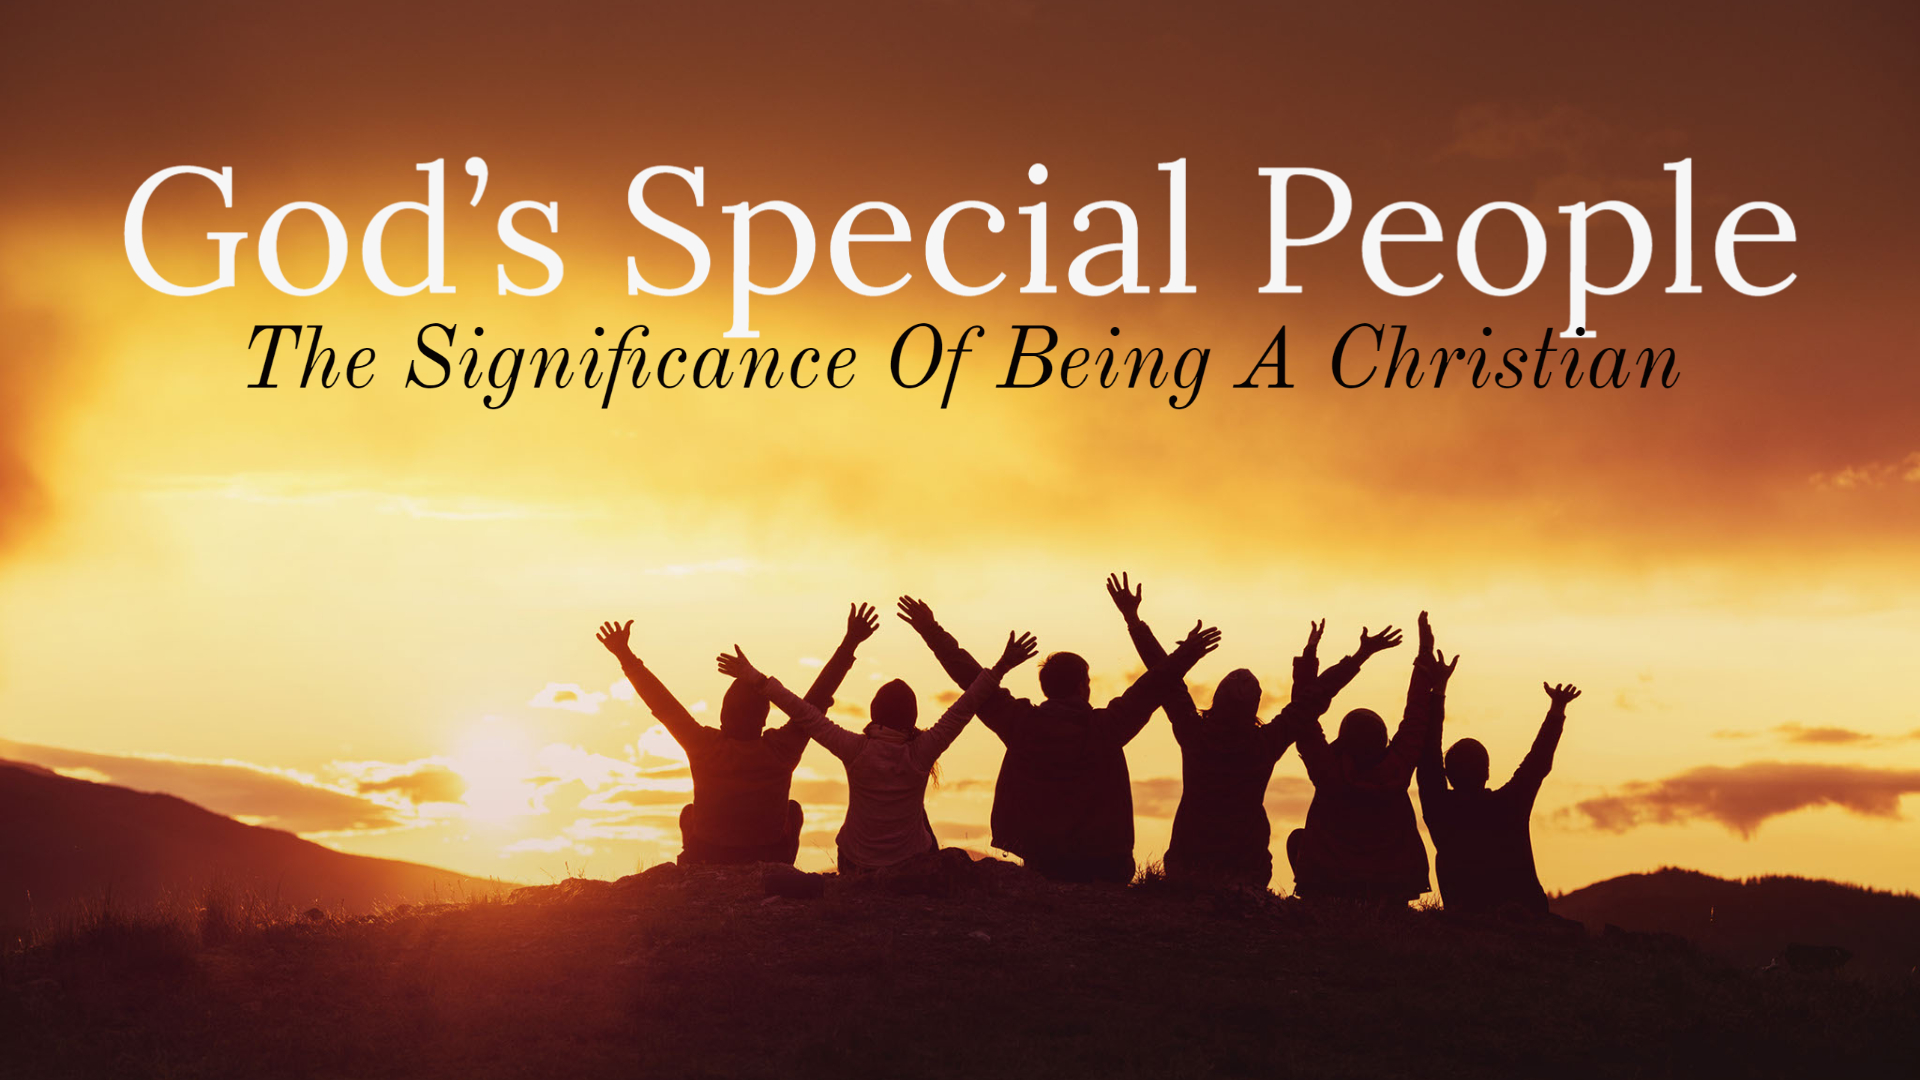 People Who Belong To The Lord